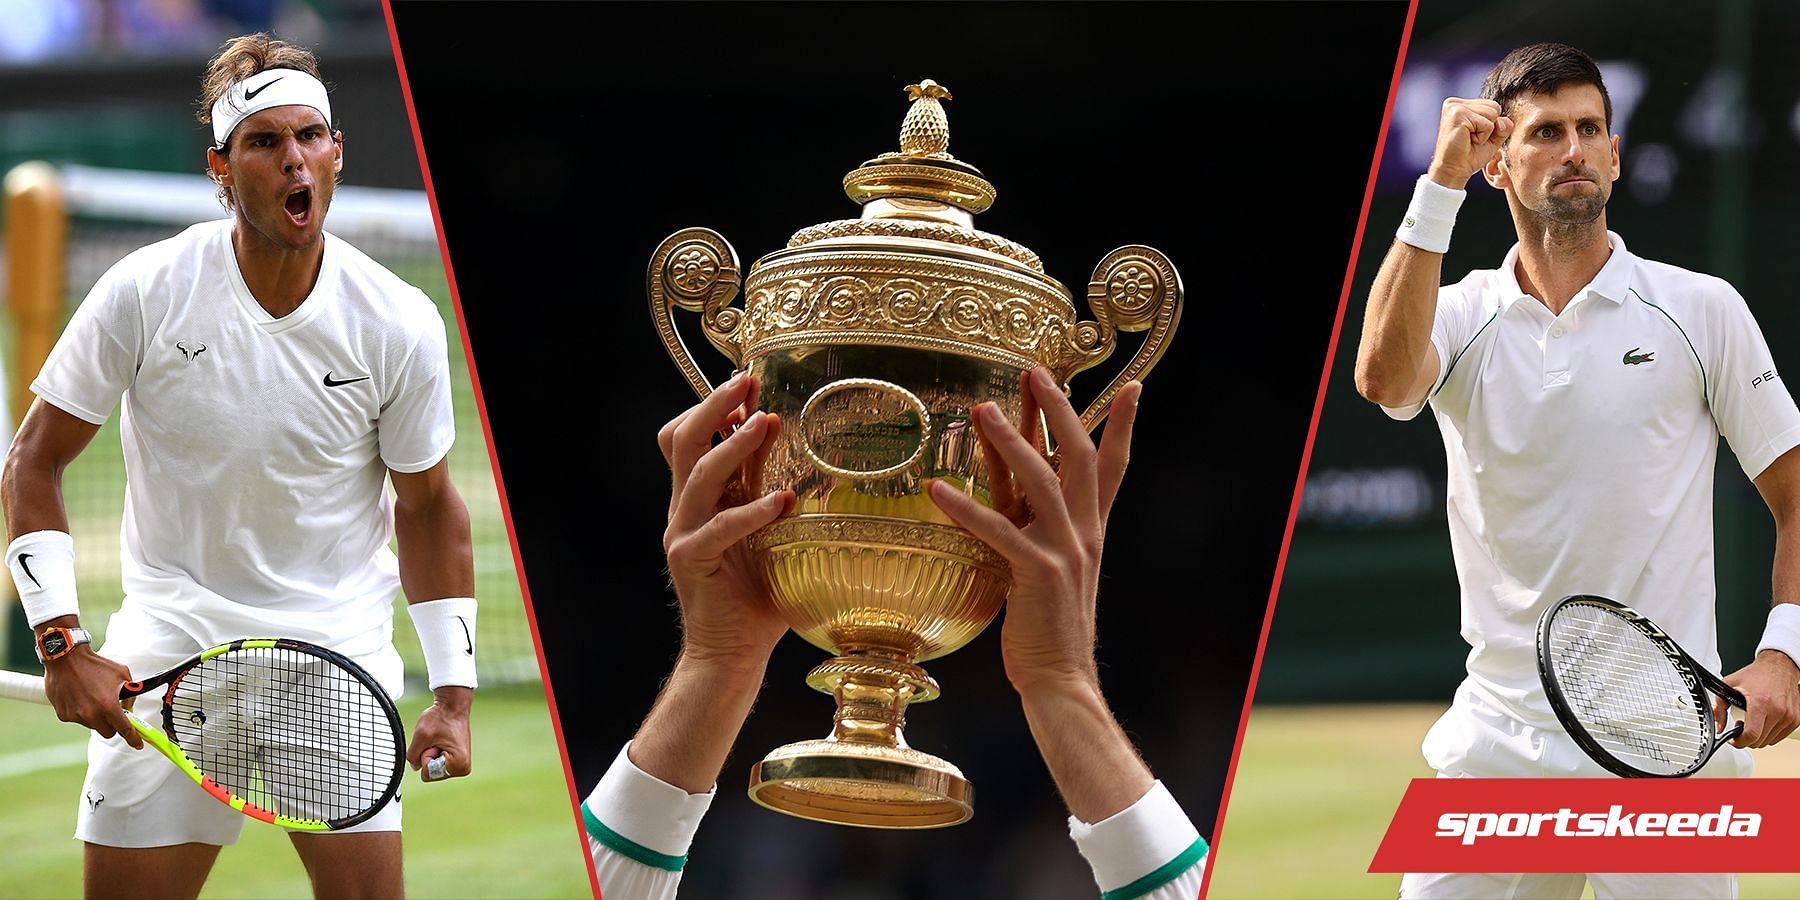 The draw for Wimbledon 2022 will take place on Friday